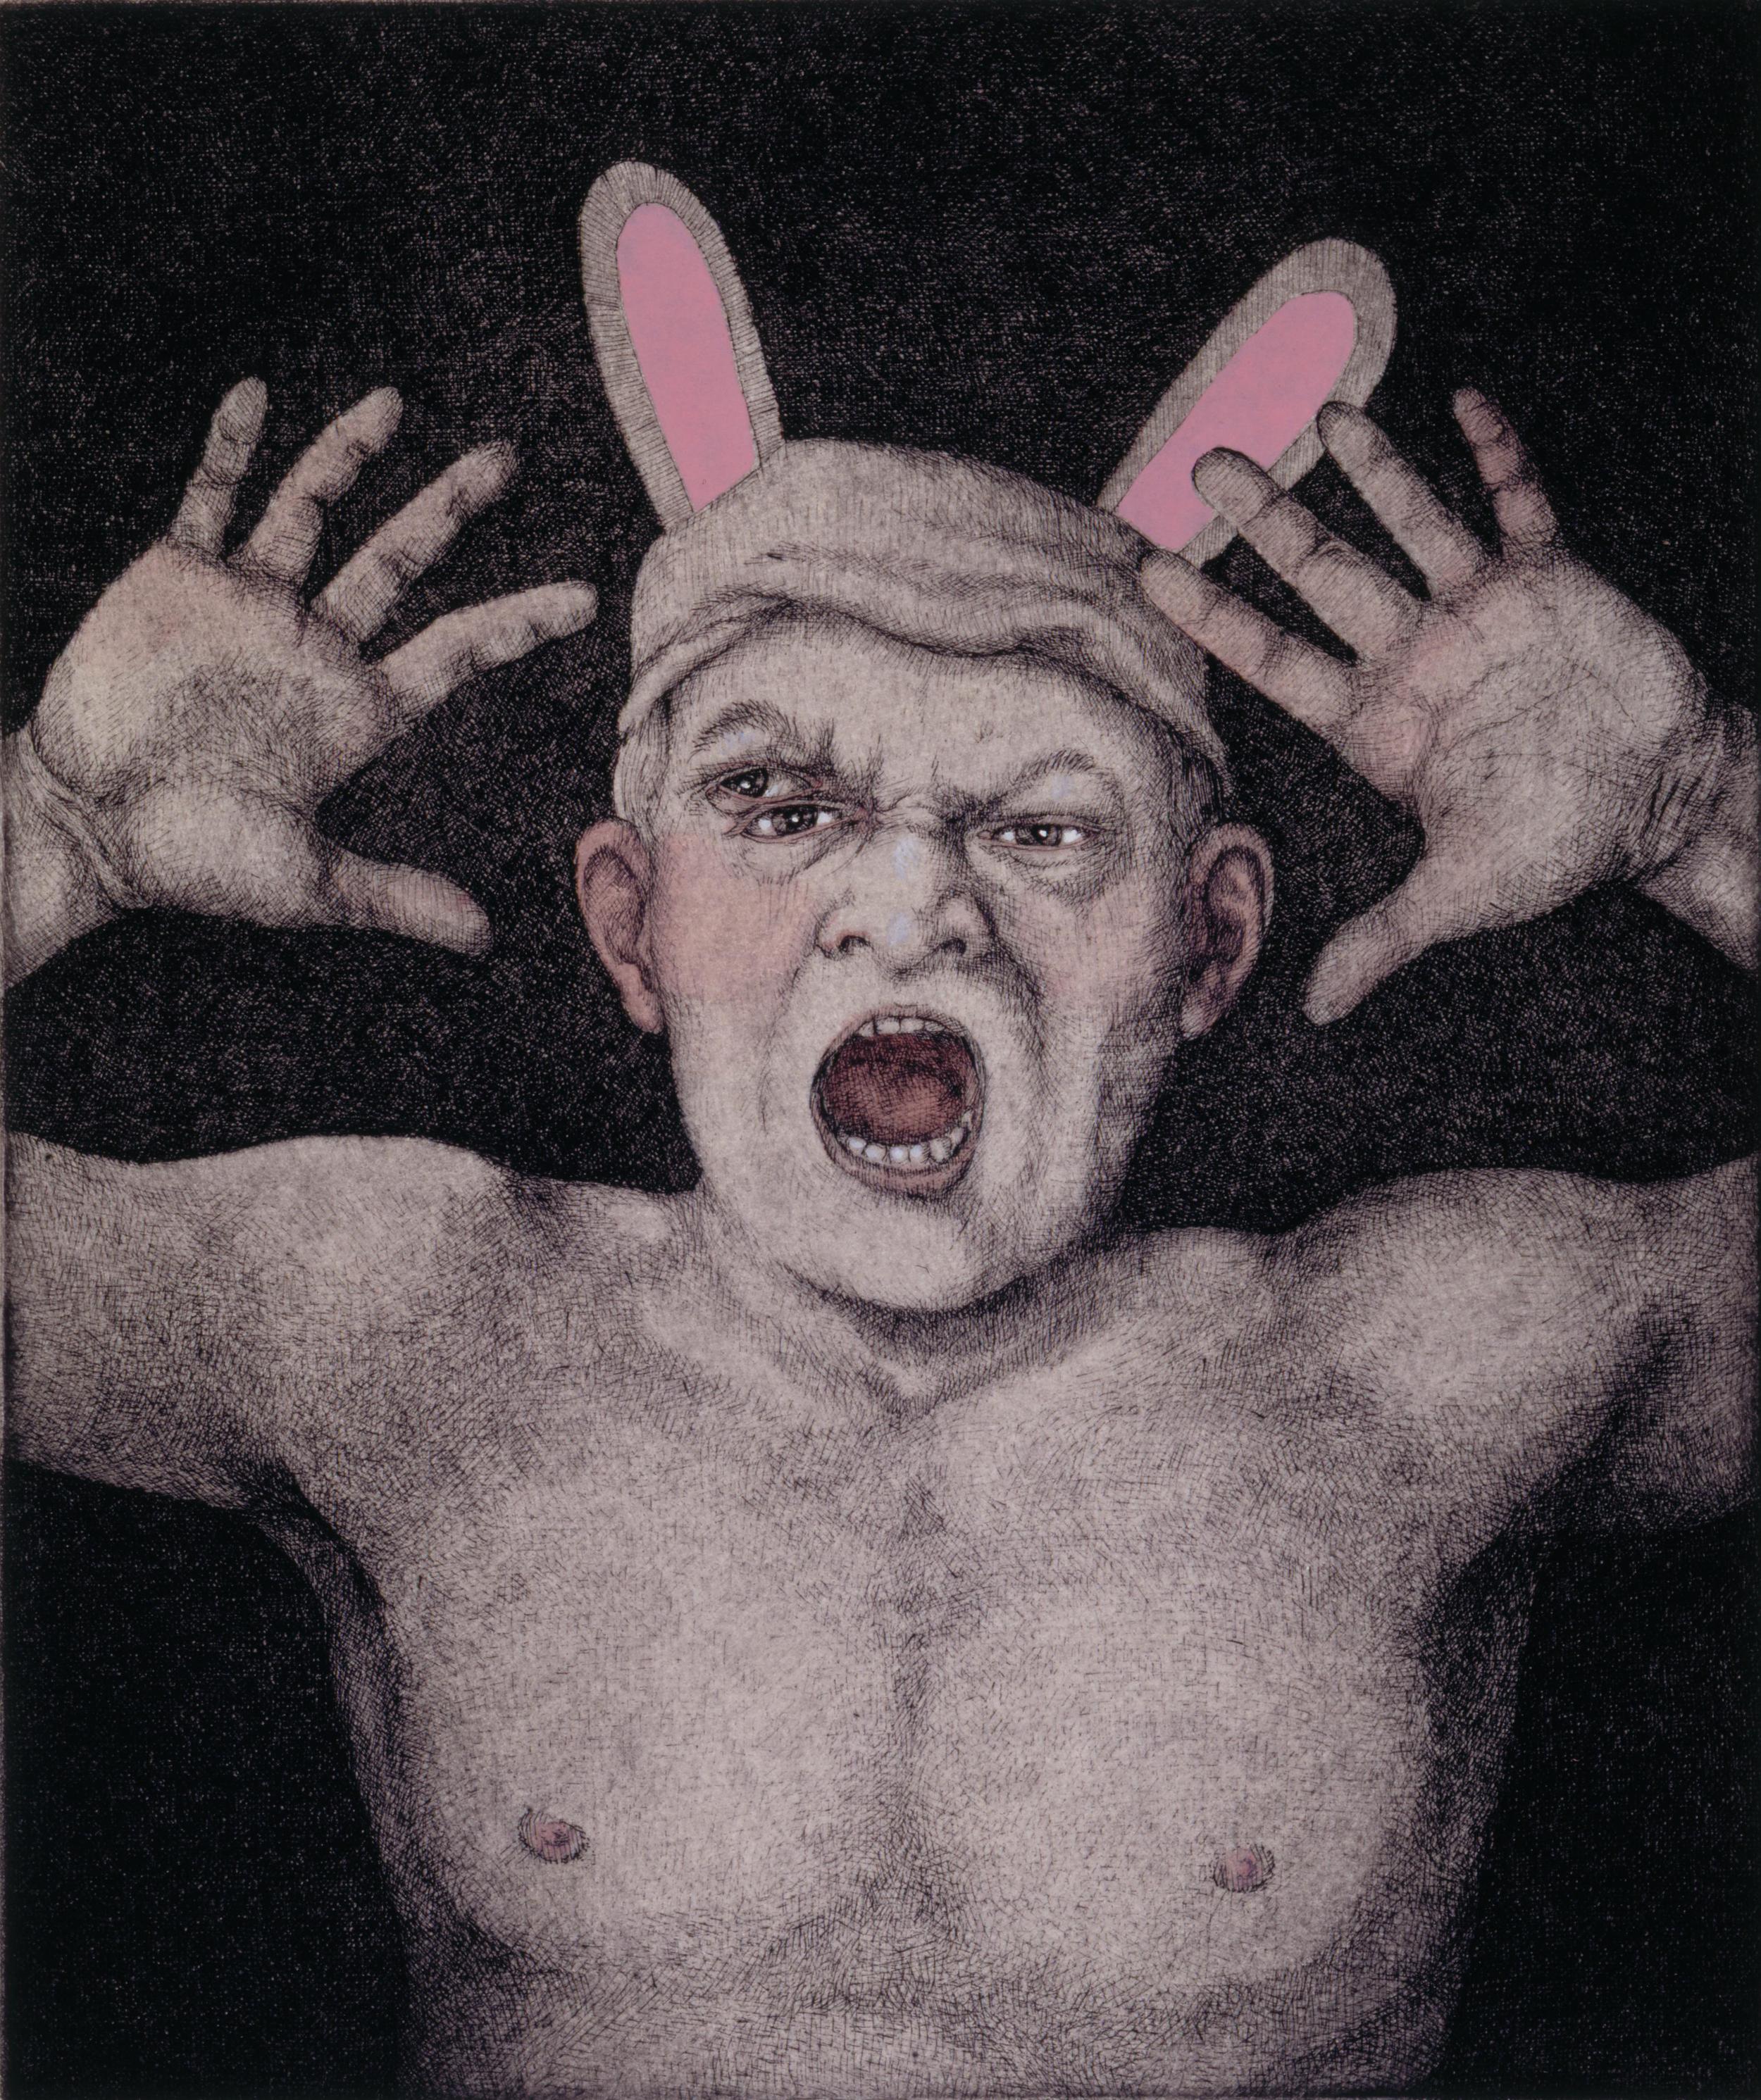 Bunnyman,  2001 etching with gouache, ed. 70, 10 x 8.50 inches